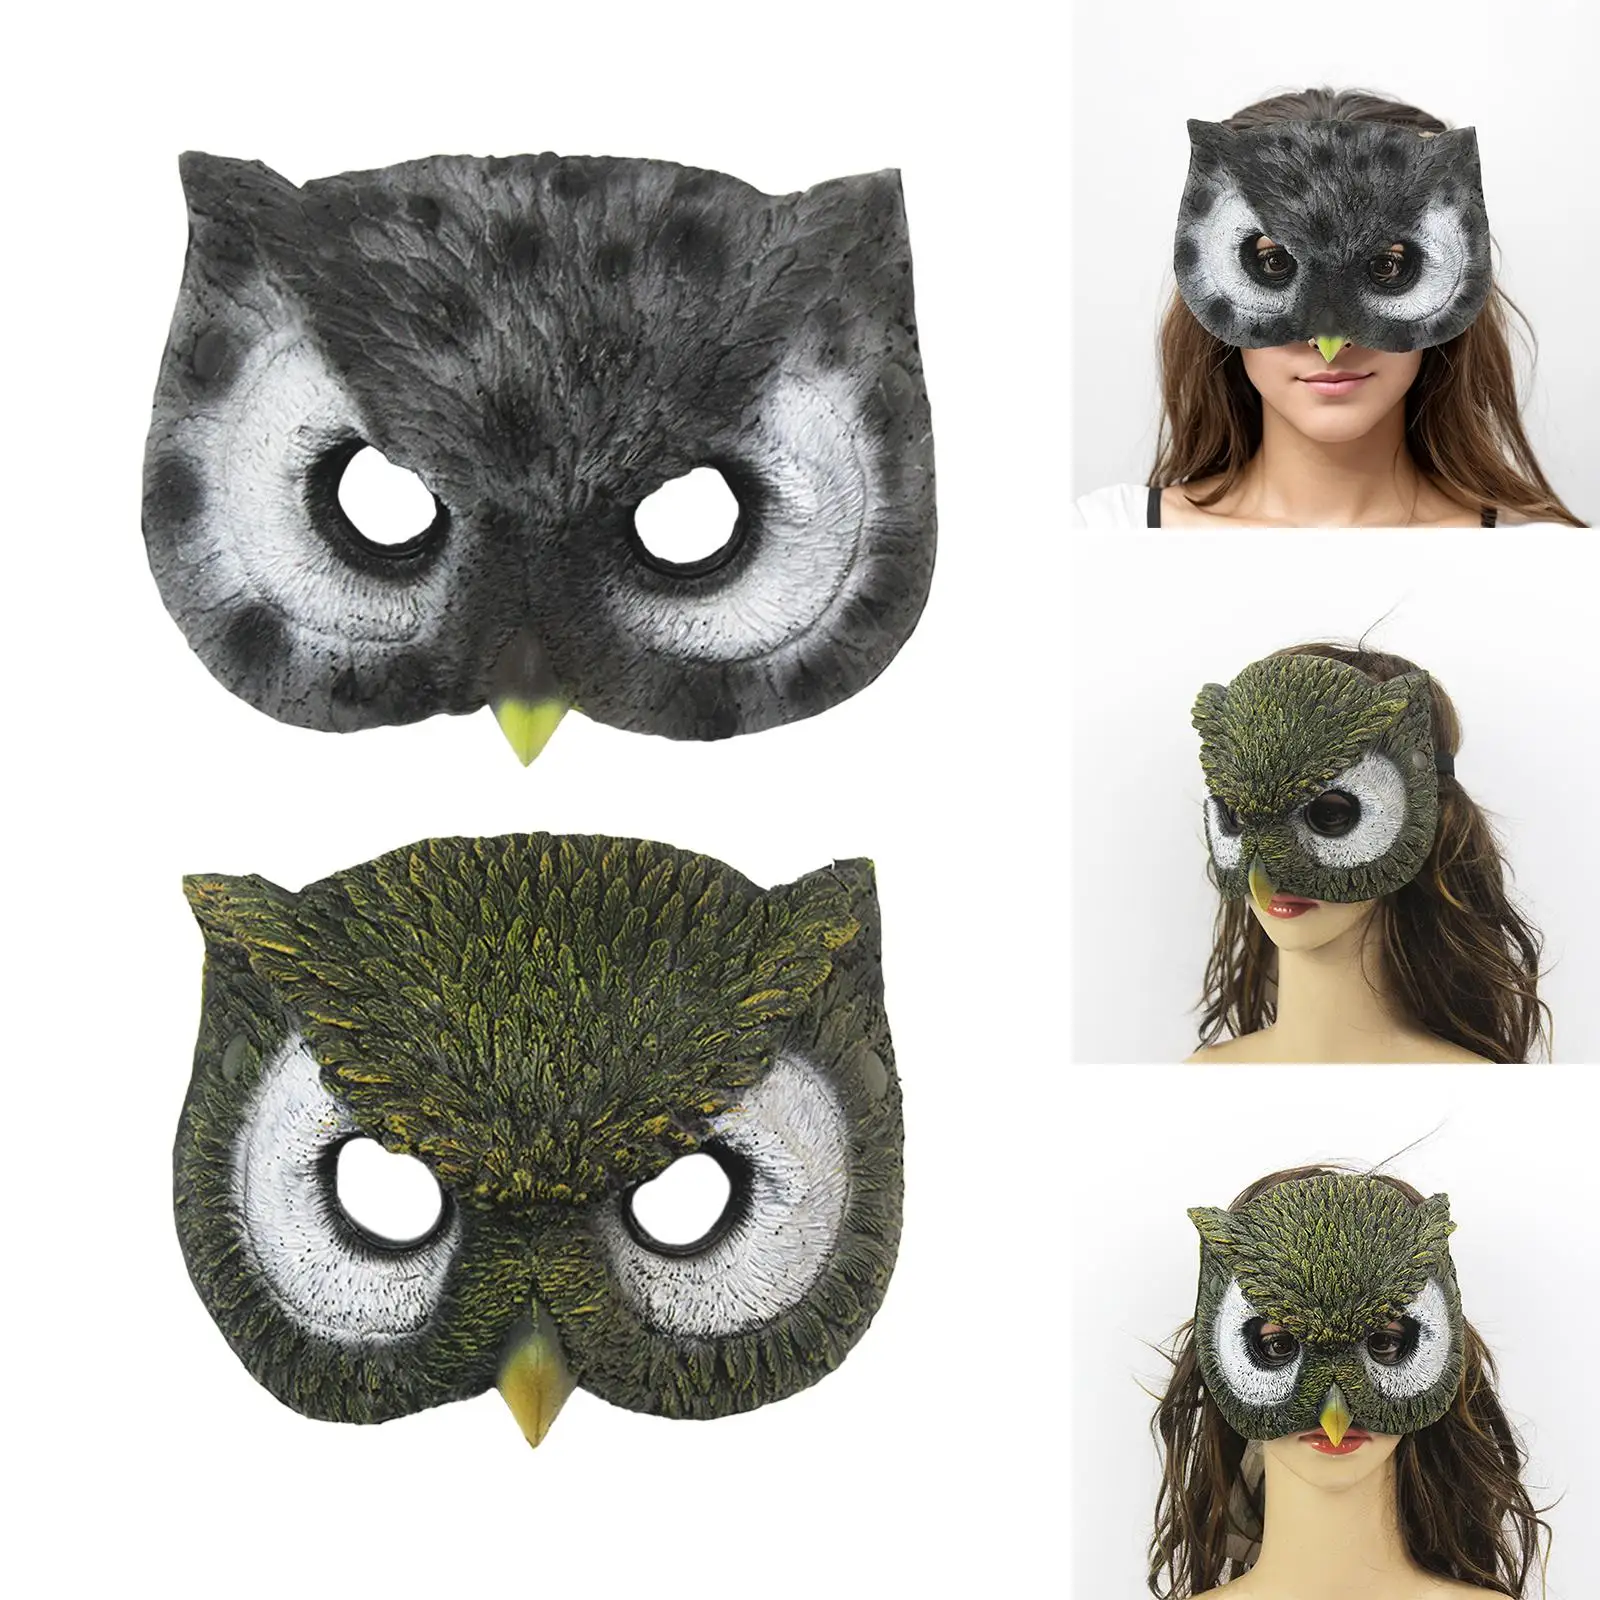 Owl Masks Cosplay Clothes Decoration Fancy Dress Half Face Mask Bird Masks for Adults Nightclub Festival Masquerade Ball Party